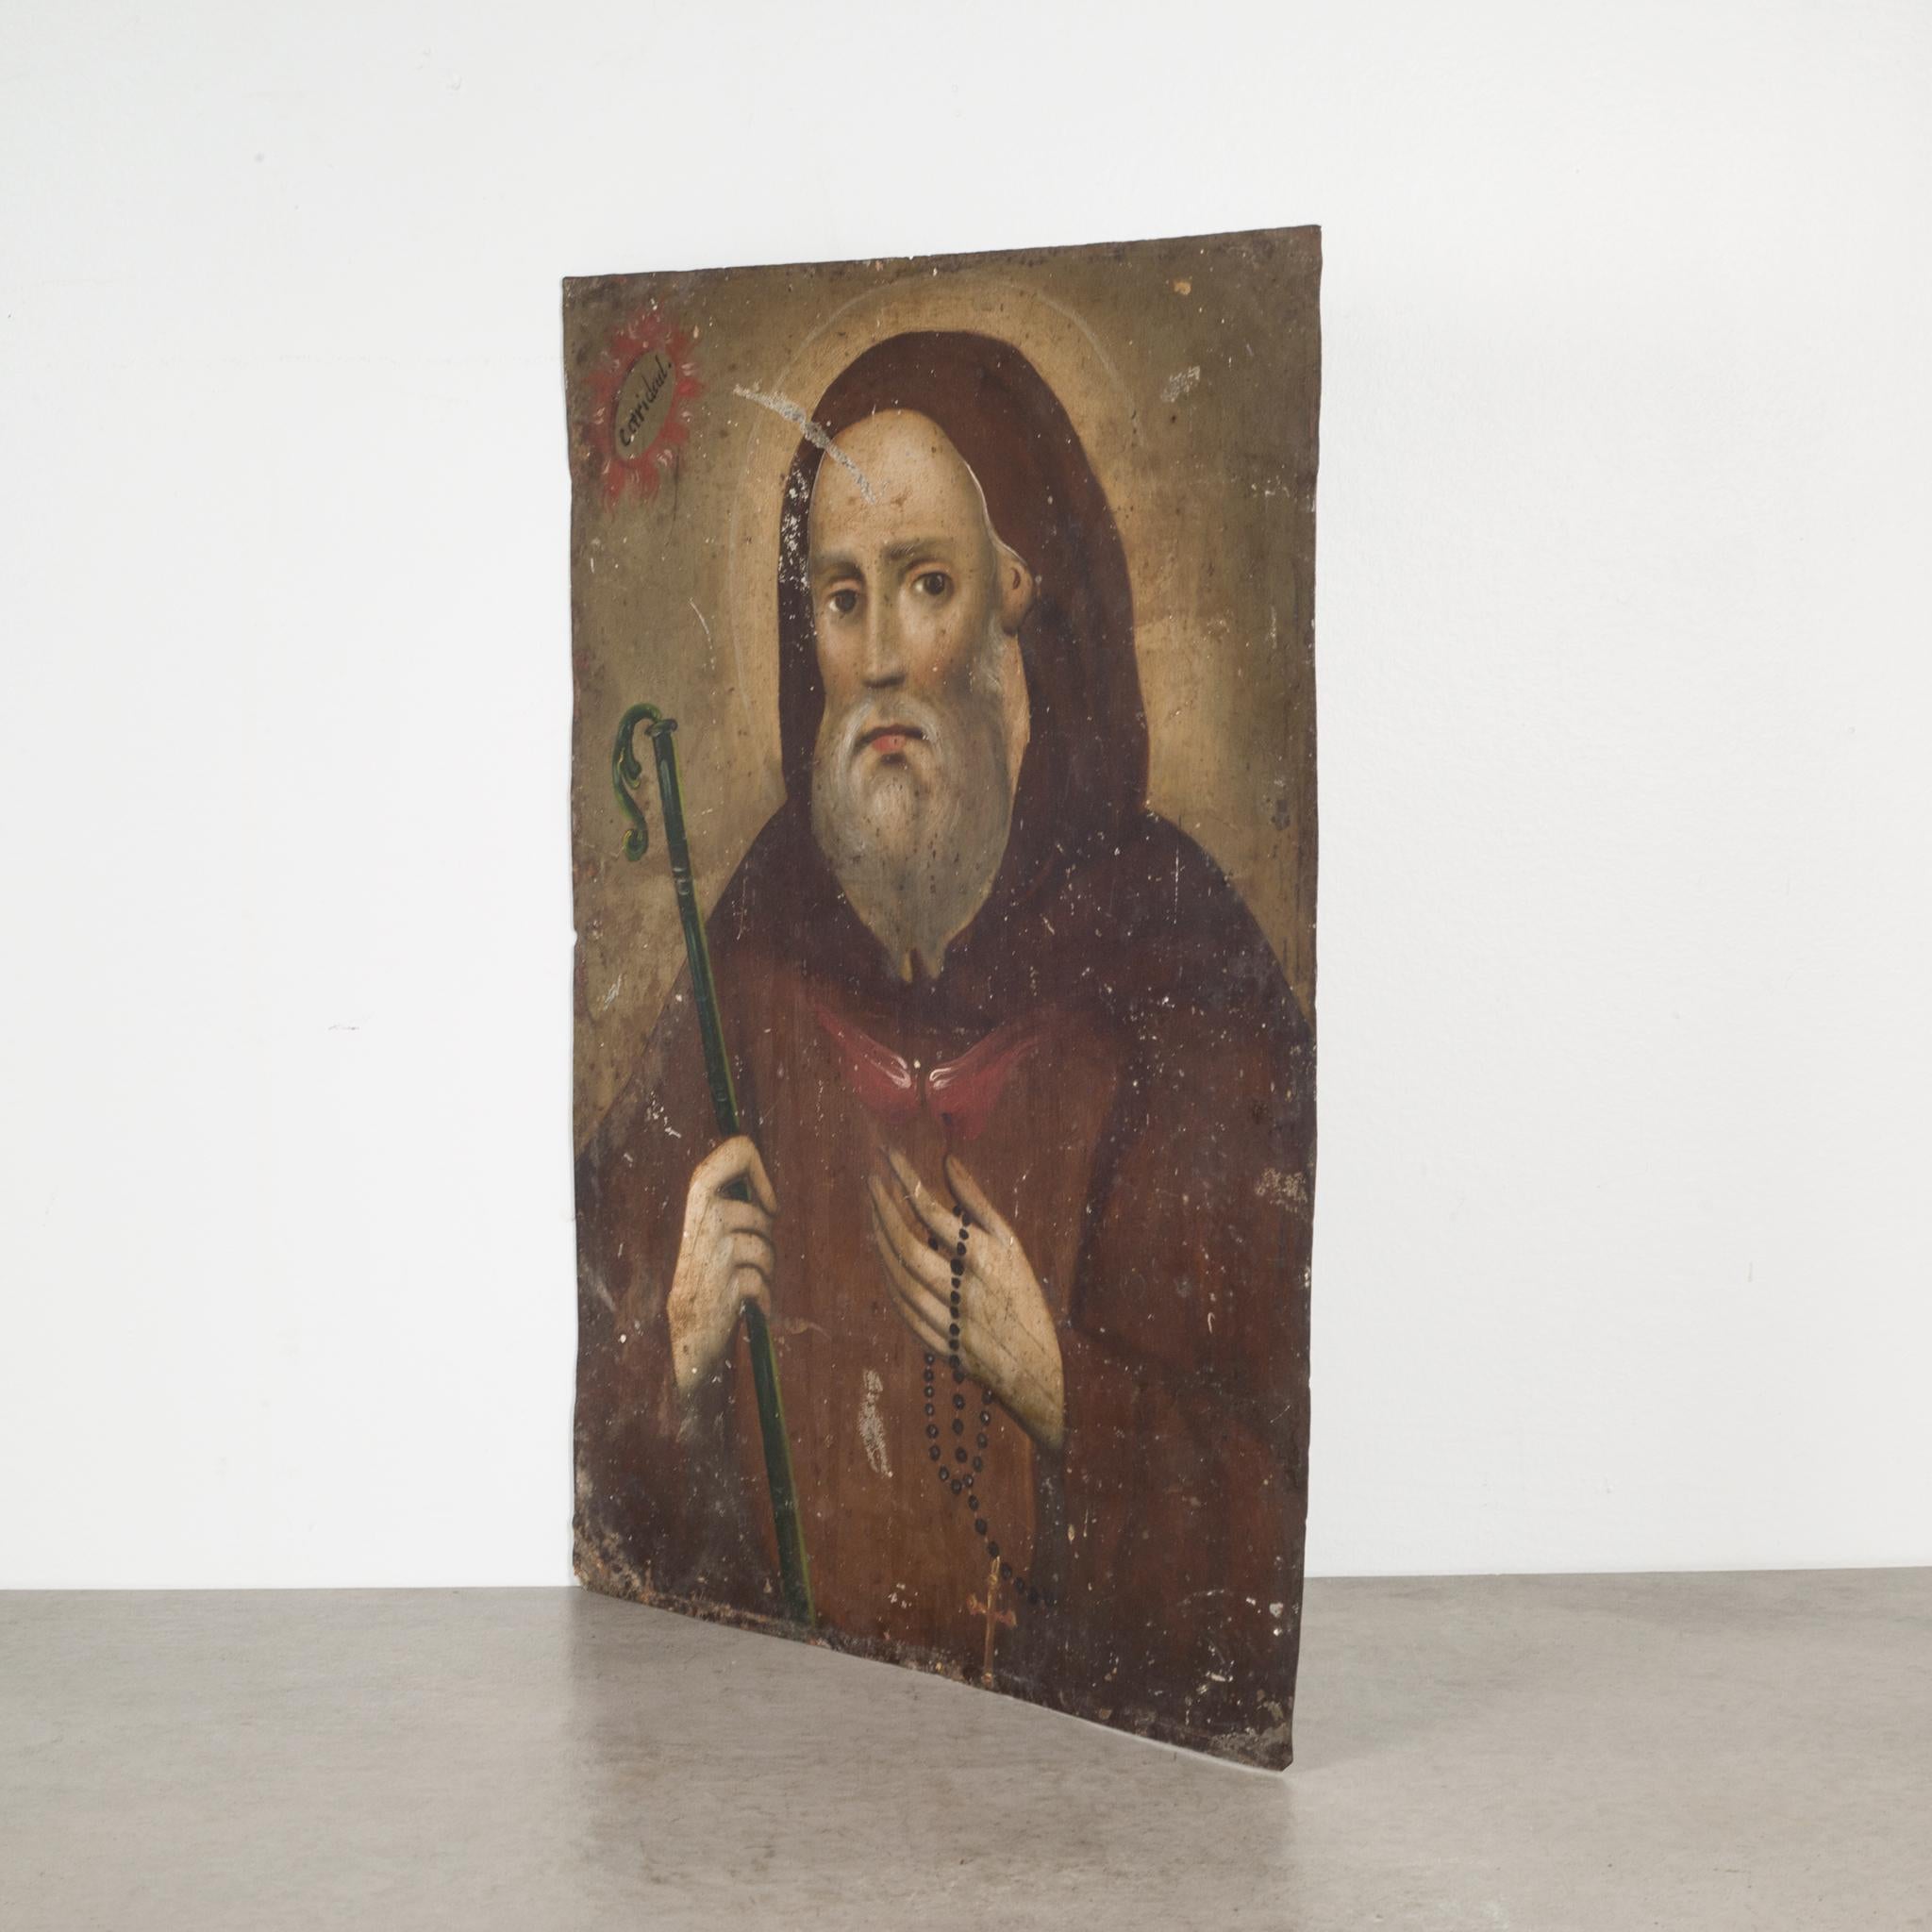 About

An original 19th century Mexican folk retablo of Saint Francis. Oil paint on tin.

St. Francis of Assisi, Italian San Francesco d’Assisi was born 1181-1182 in Assisi, duchy of Spoleto, Italy and died October 3, 1226. He was canonized July